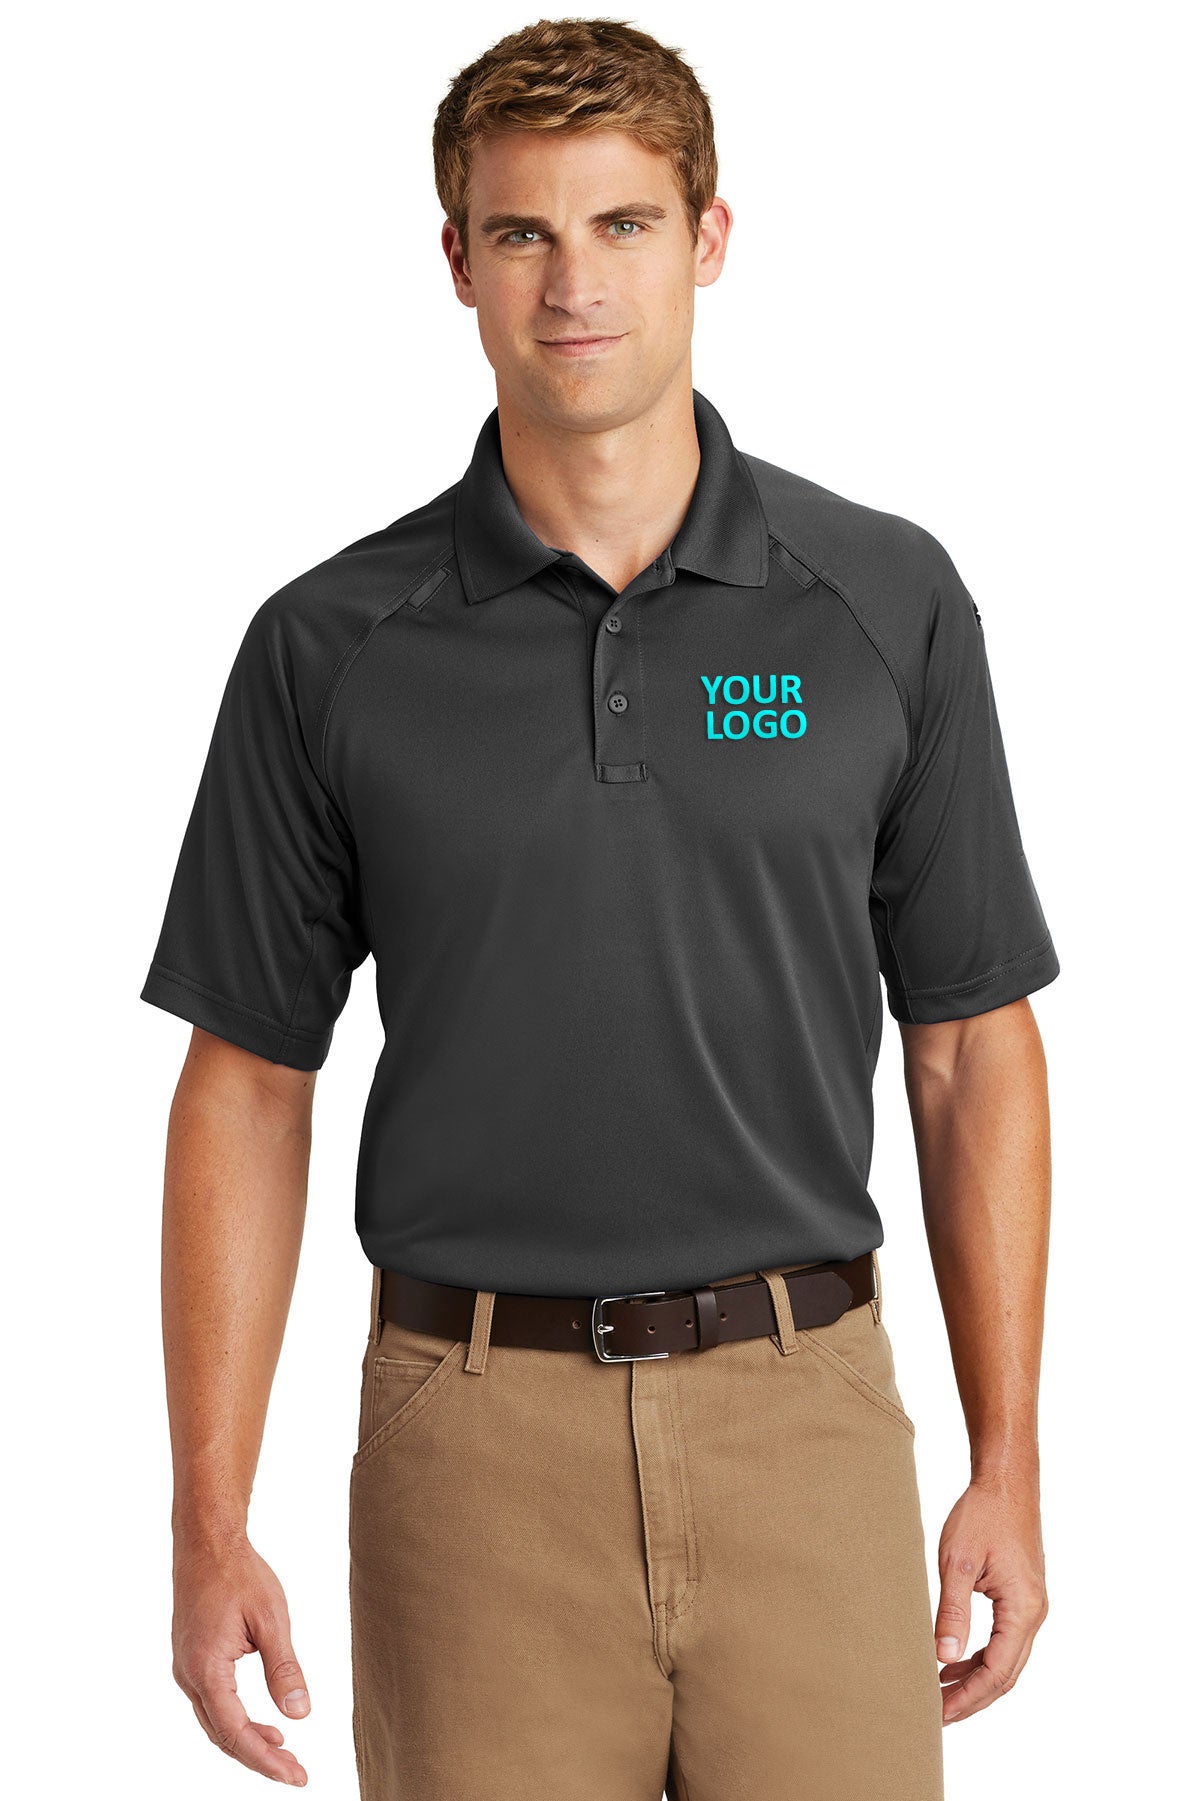 CornerStone Charcoal CS410 embroidered polo shirts for business